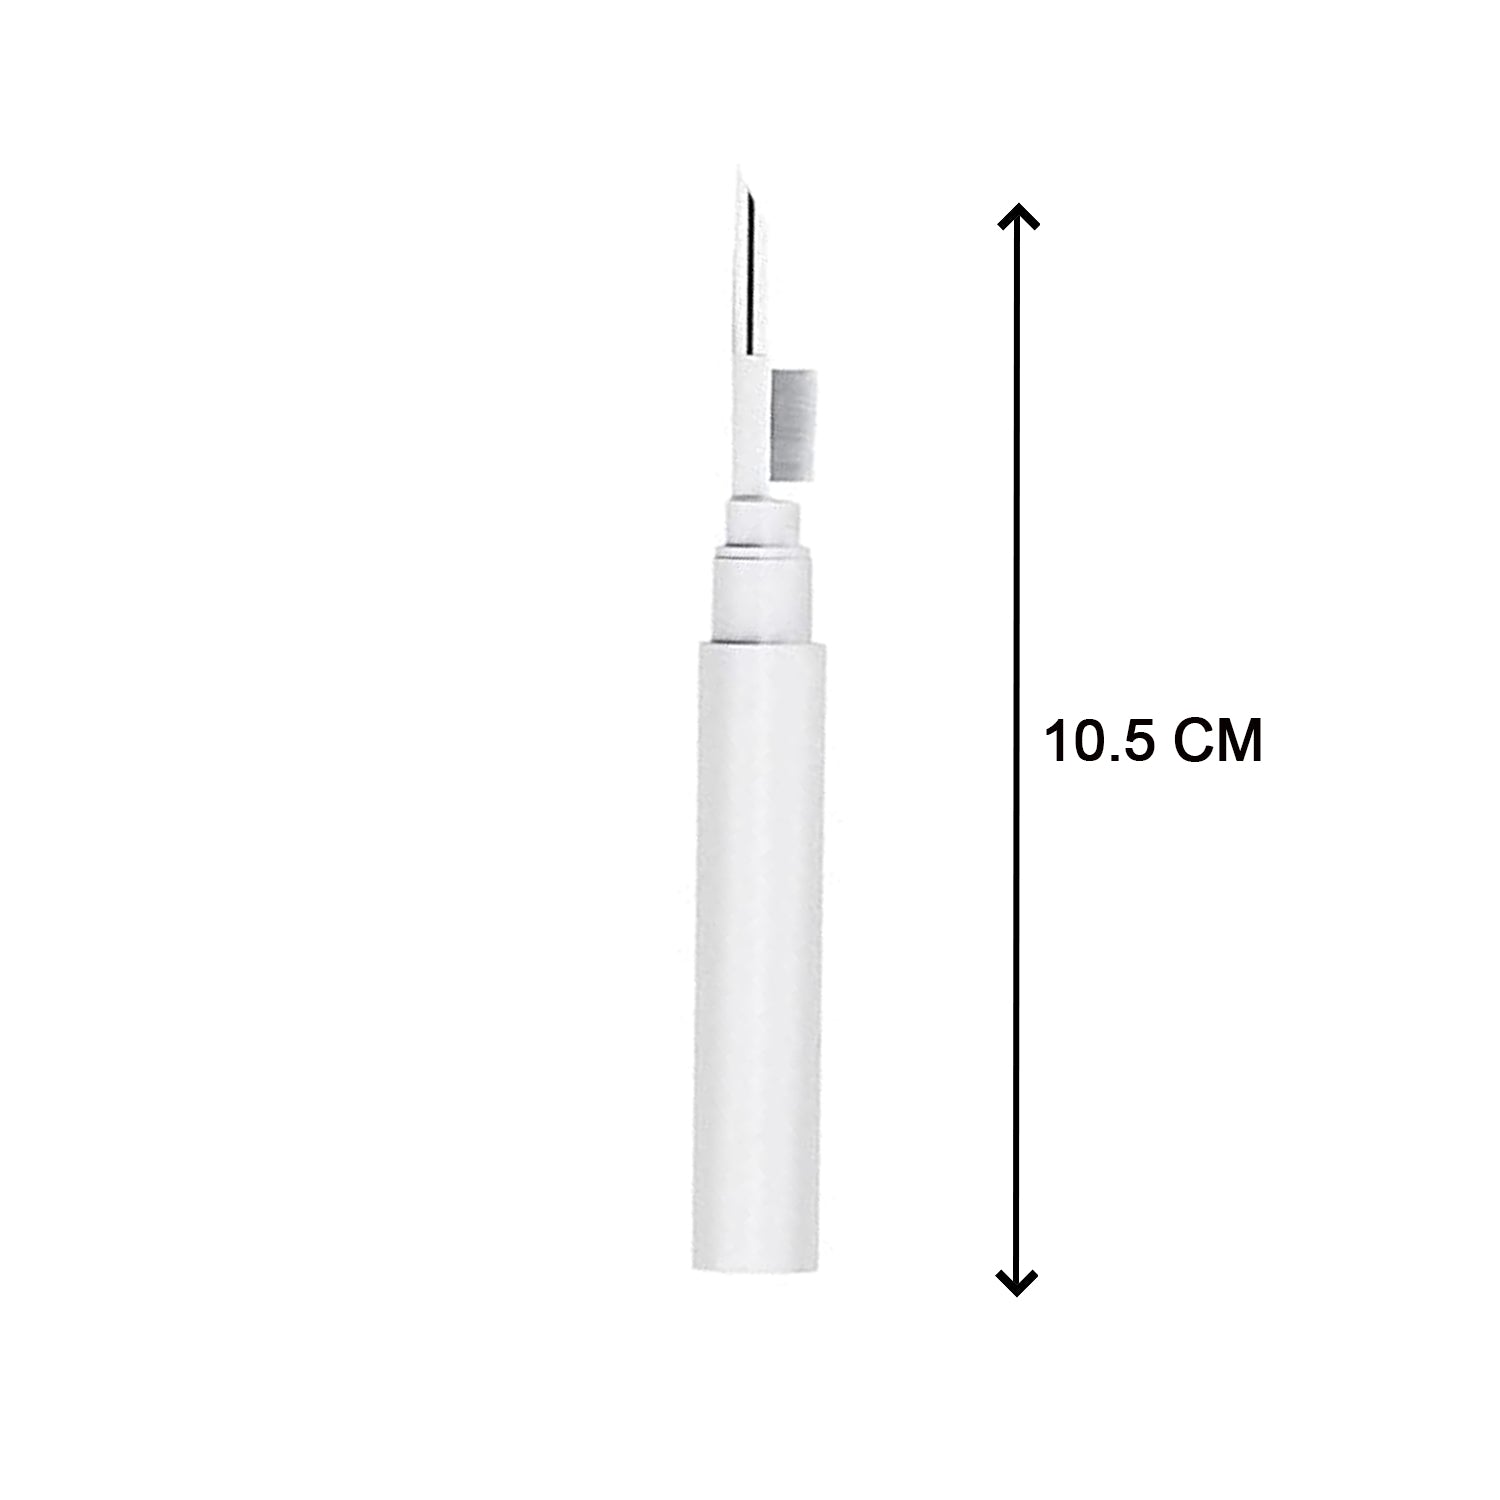 6188 3 In 1 Earbuds Cleaning Pen For Cleaning Of Ear Buds And Ear Phones Easily Without Having Any Damage. 